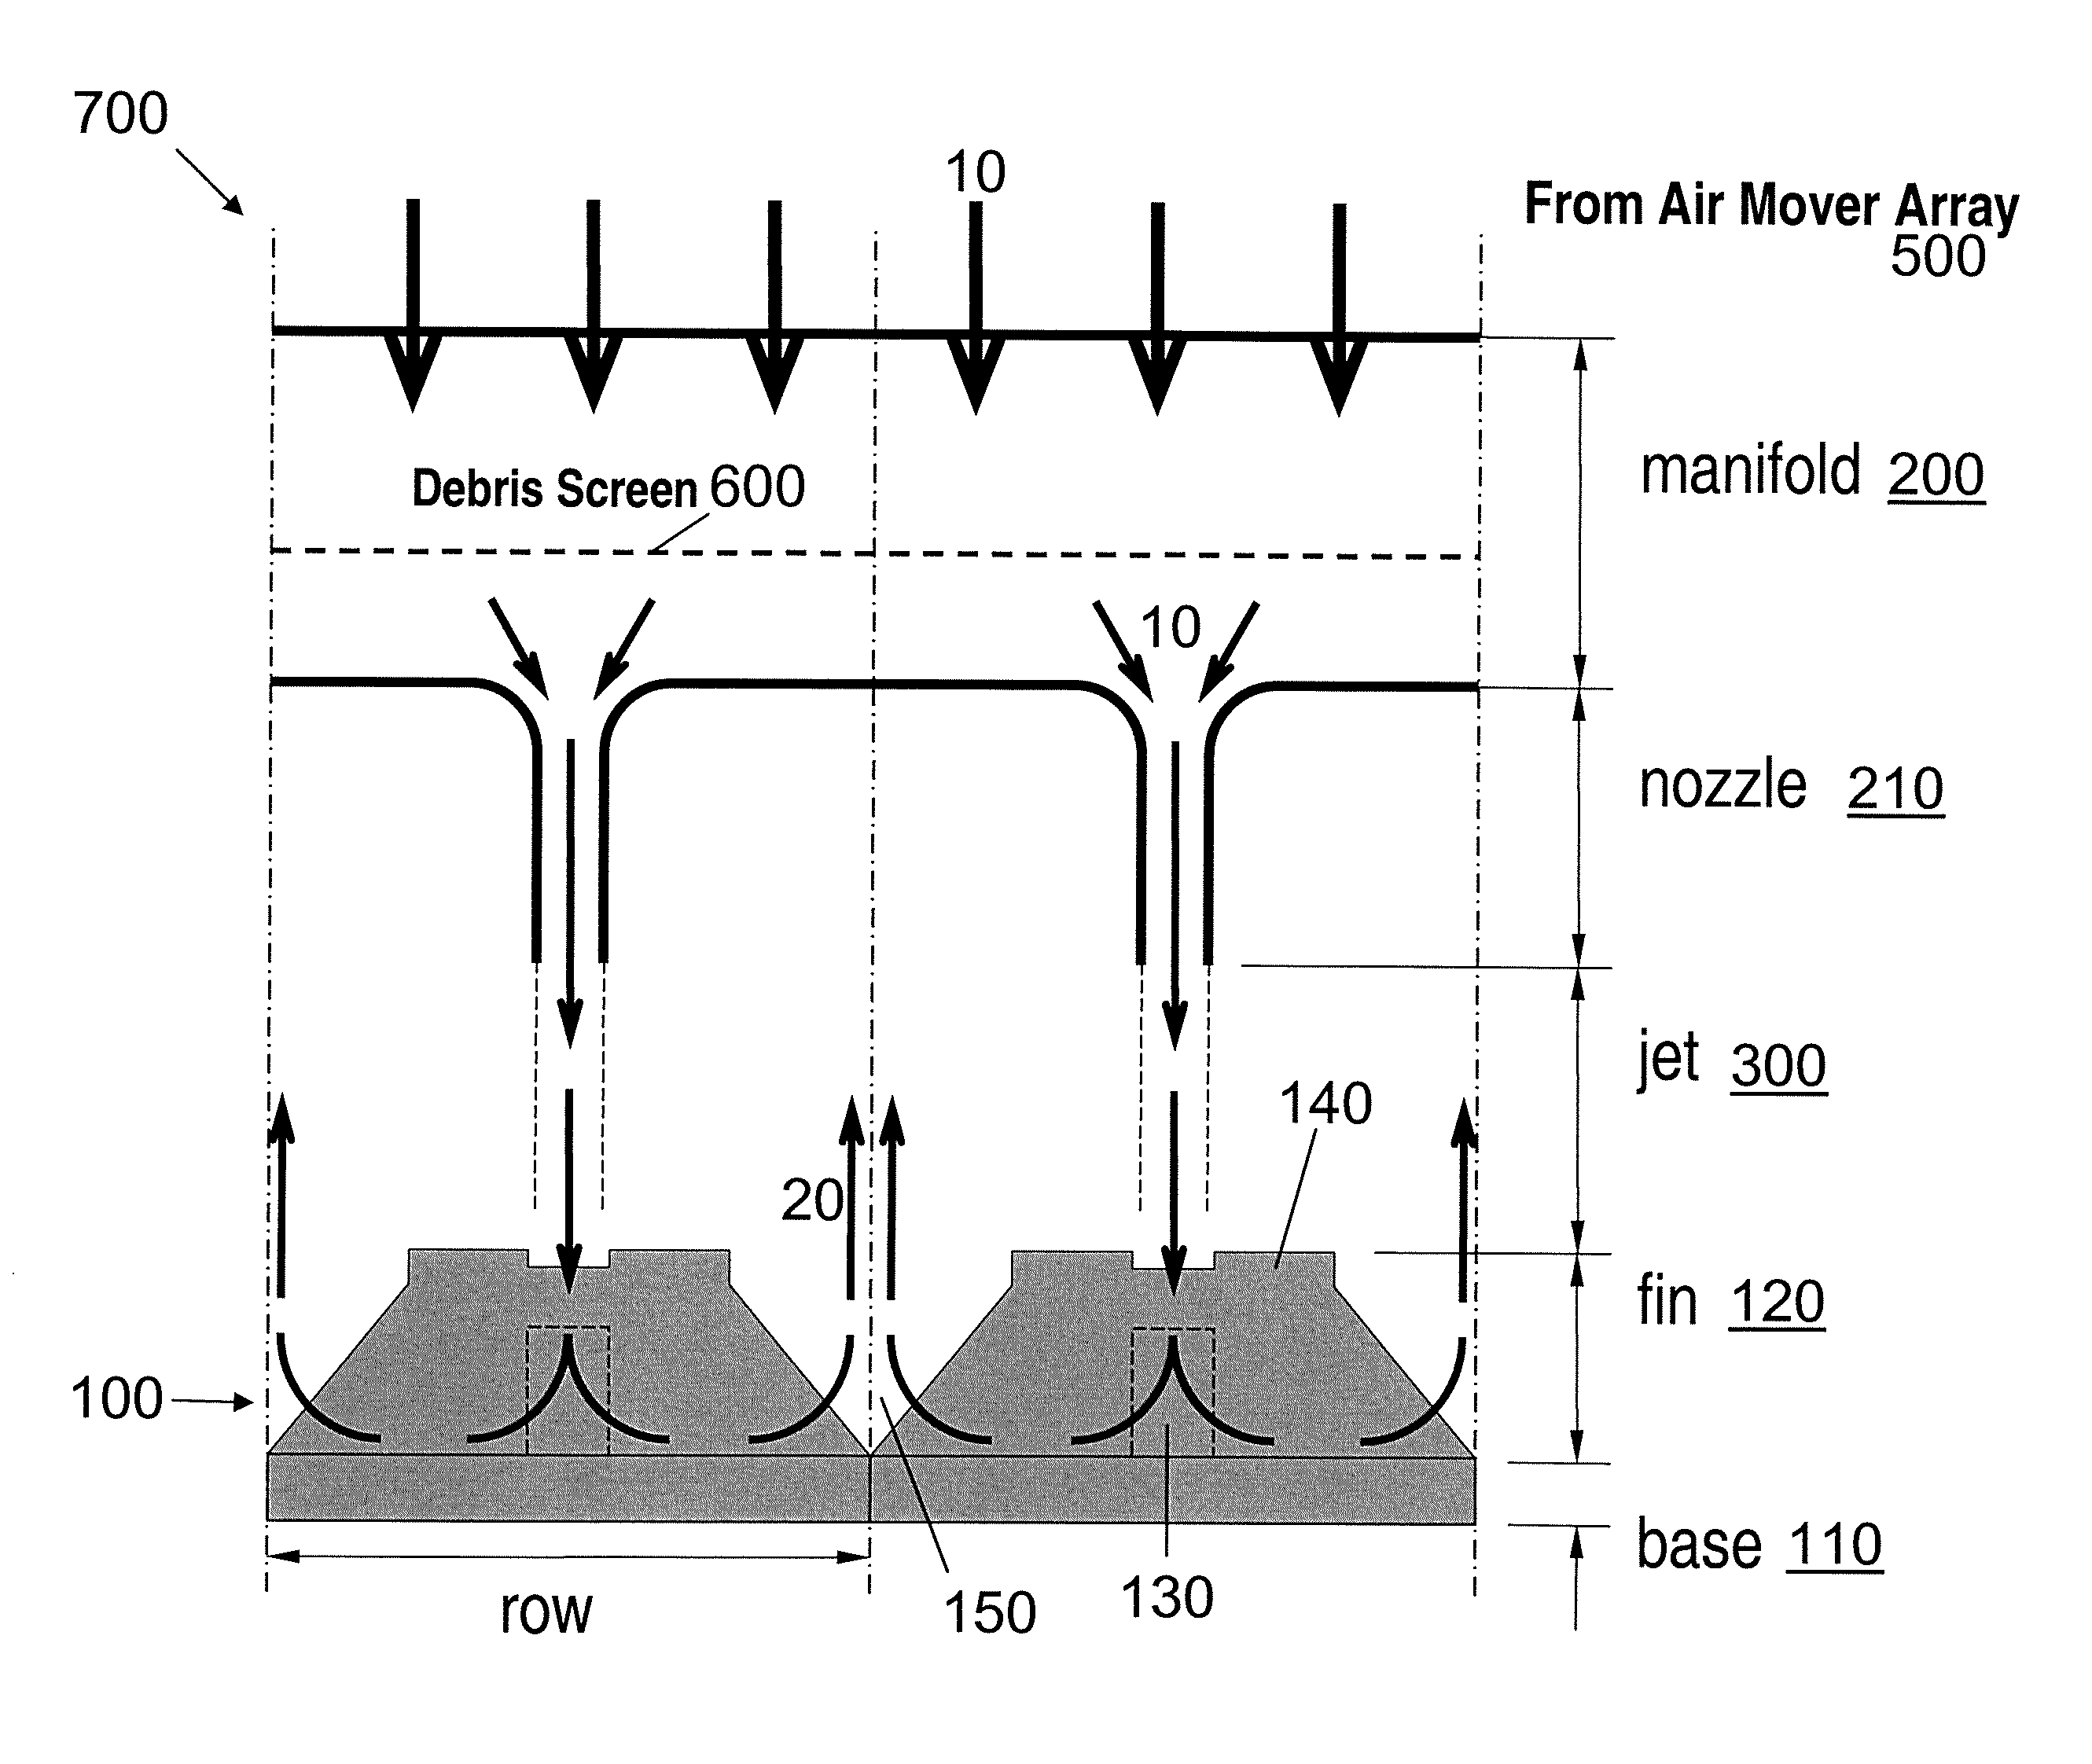 Architecture for gas cooled parallel microchannel array cooler